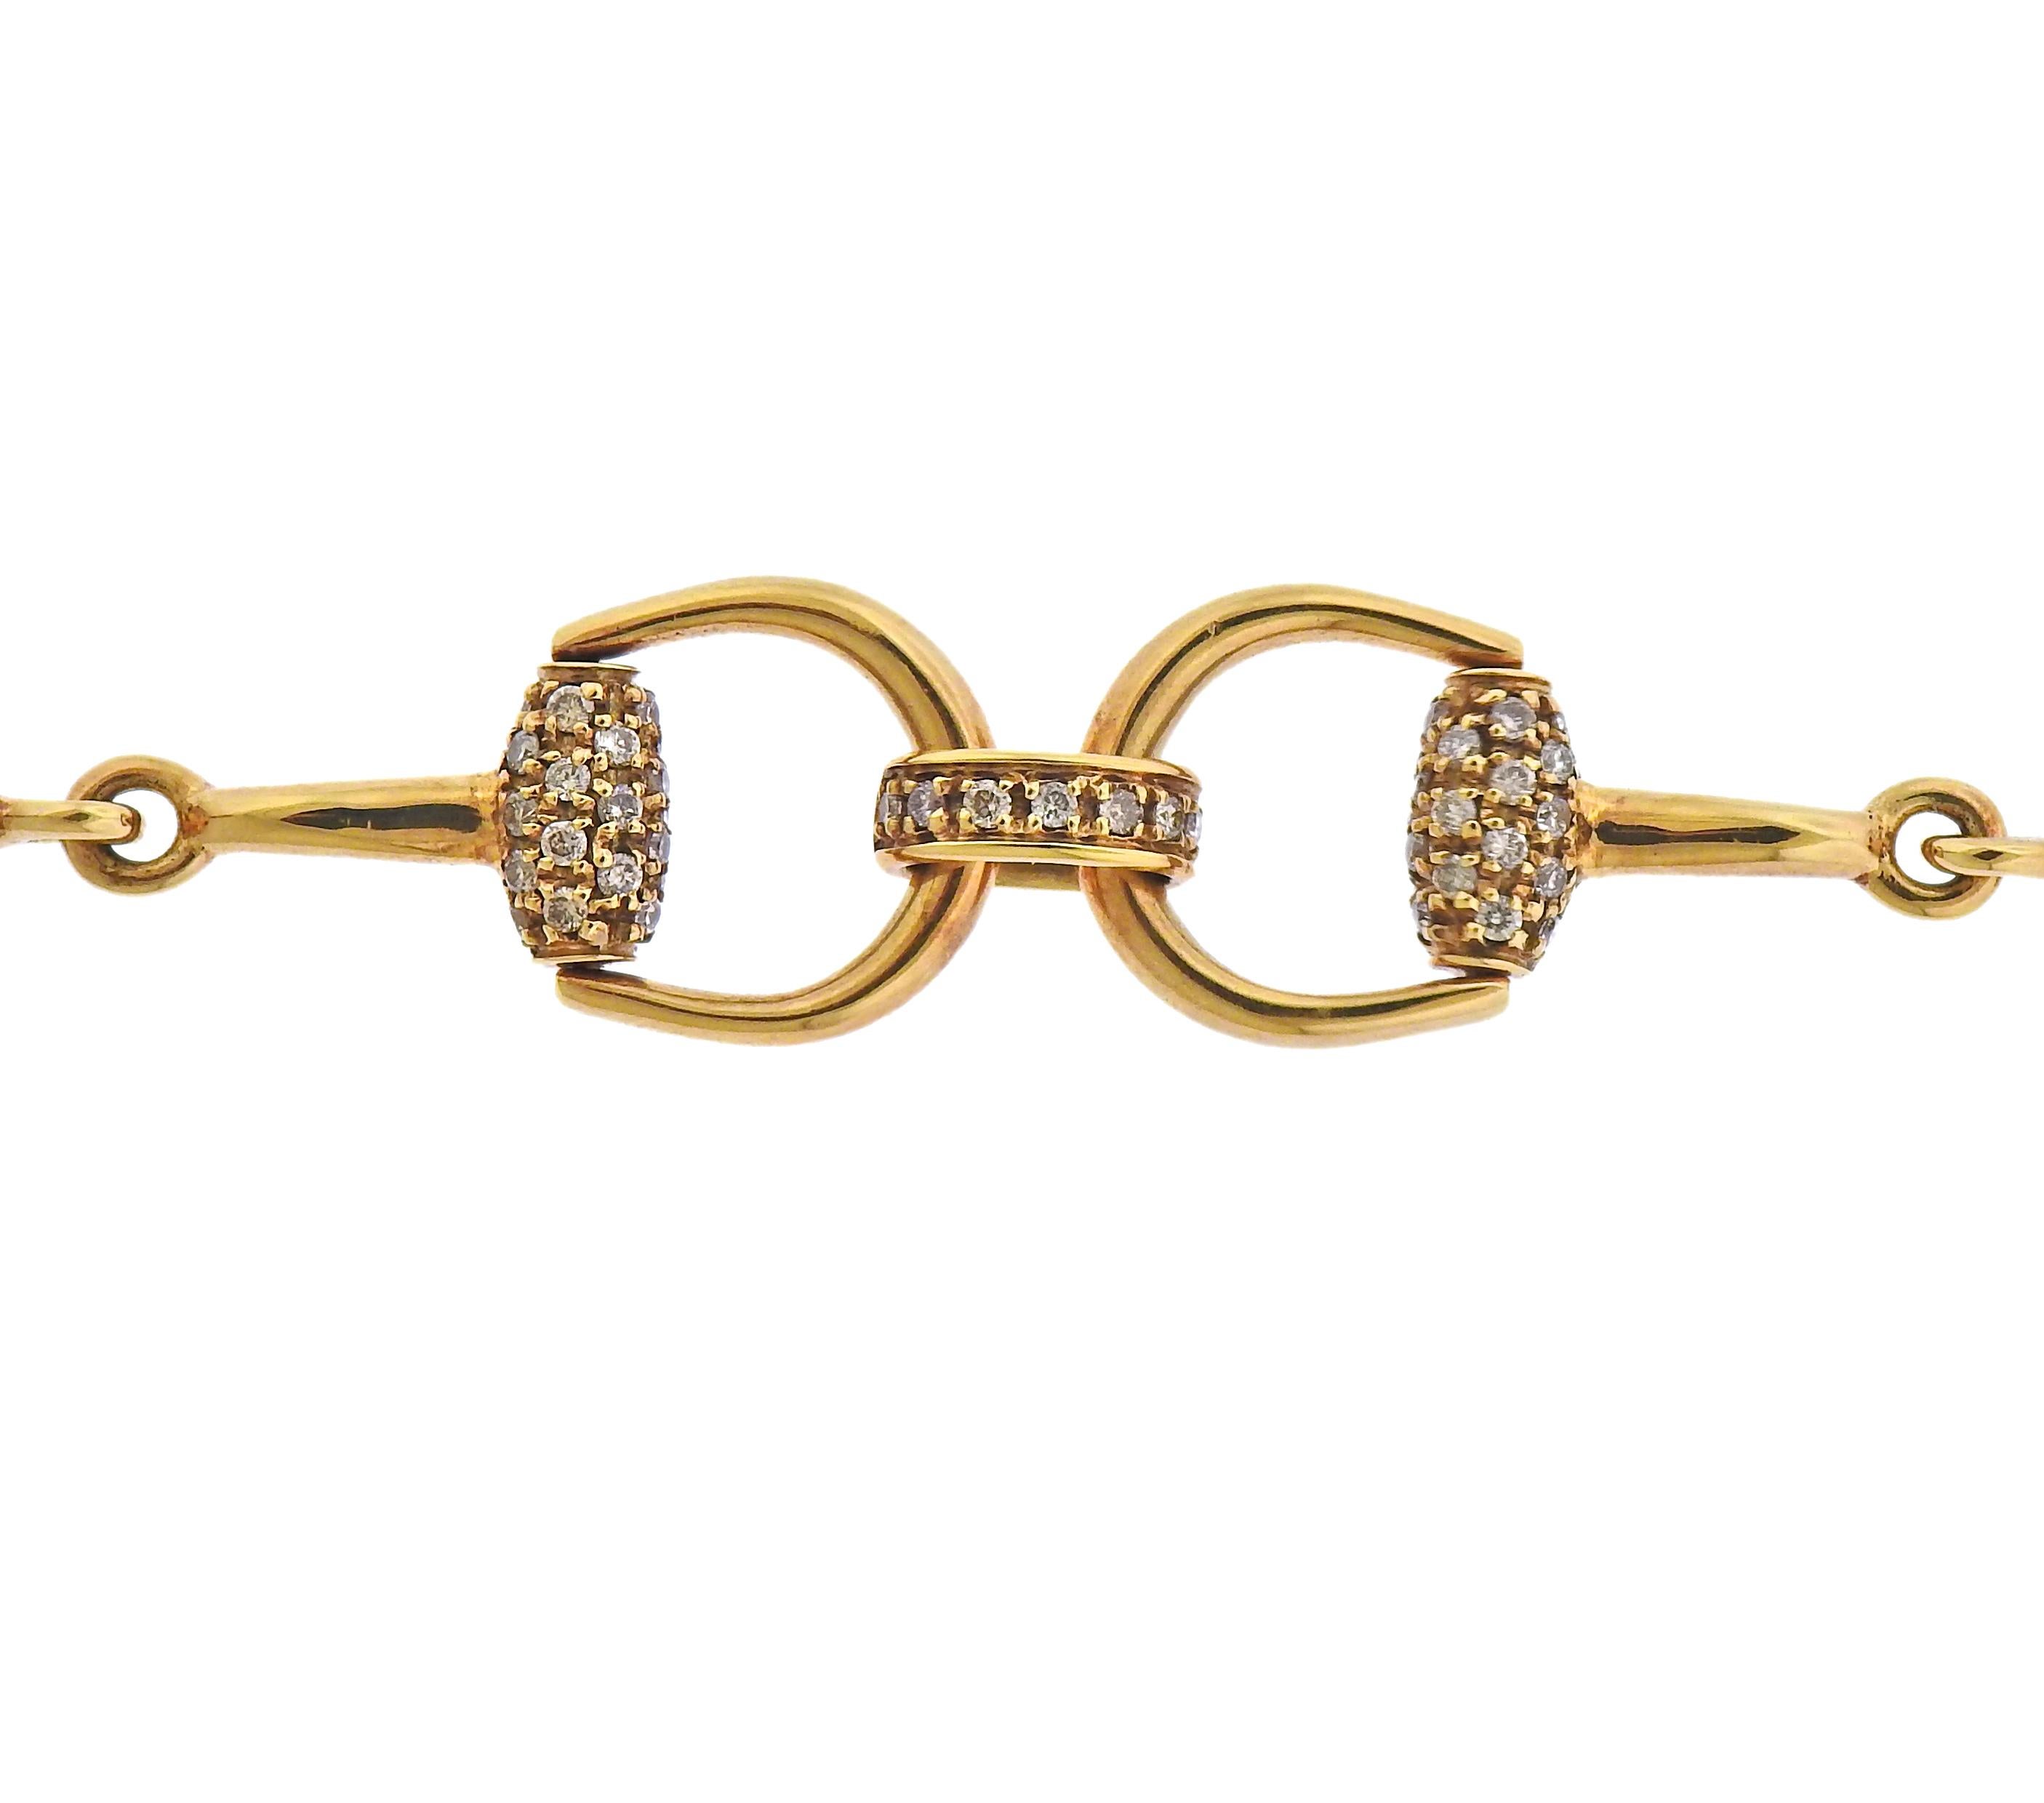 18k yellow gold Horsebit link bracelet by Gucci, with approx. 1.04ctw in G/VS diamonds. Current retail $6350. Bracelet is 6.5